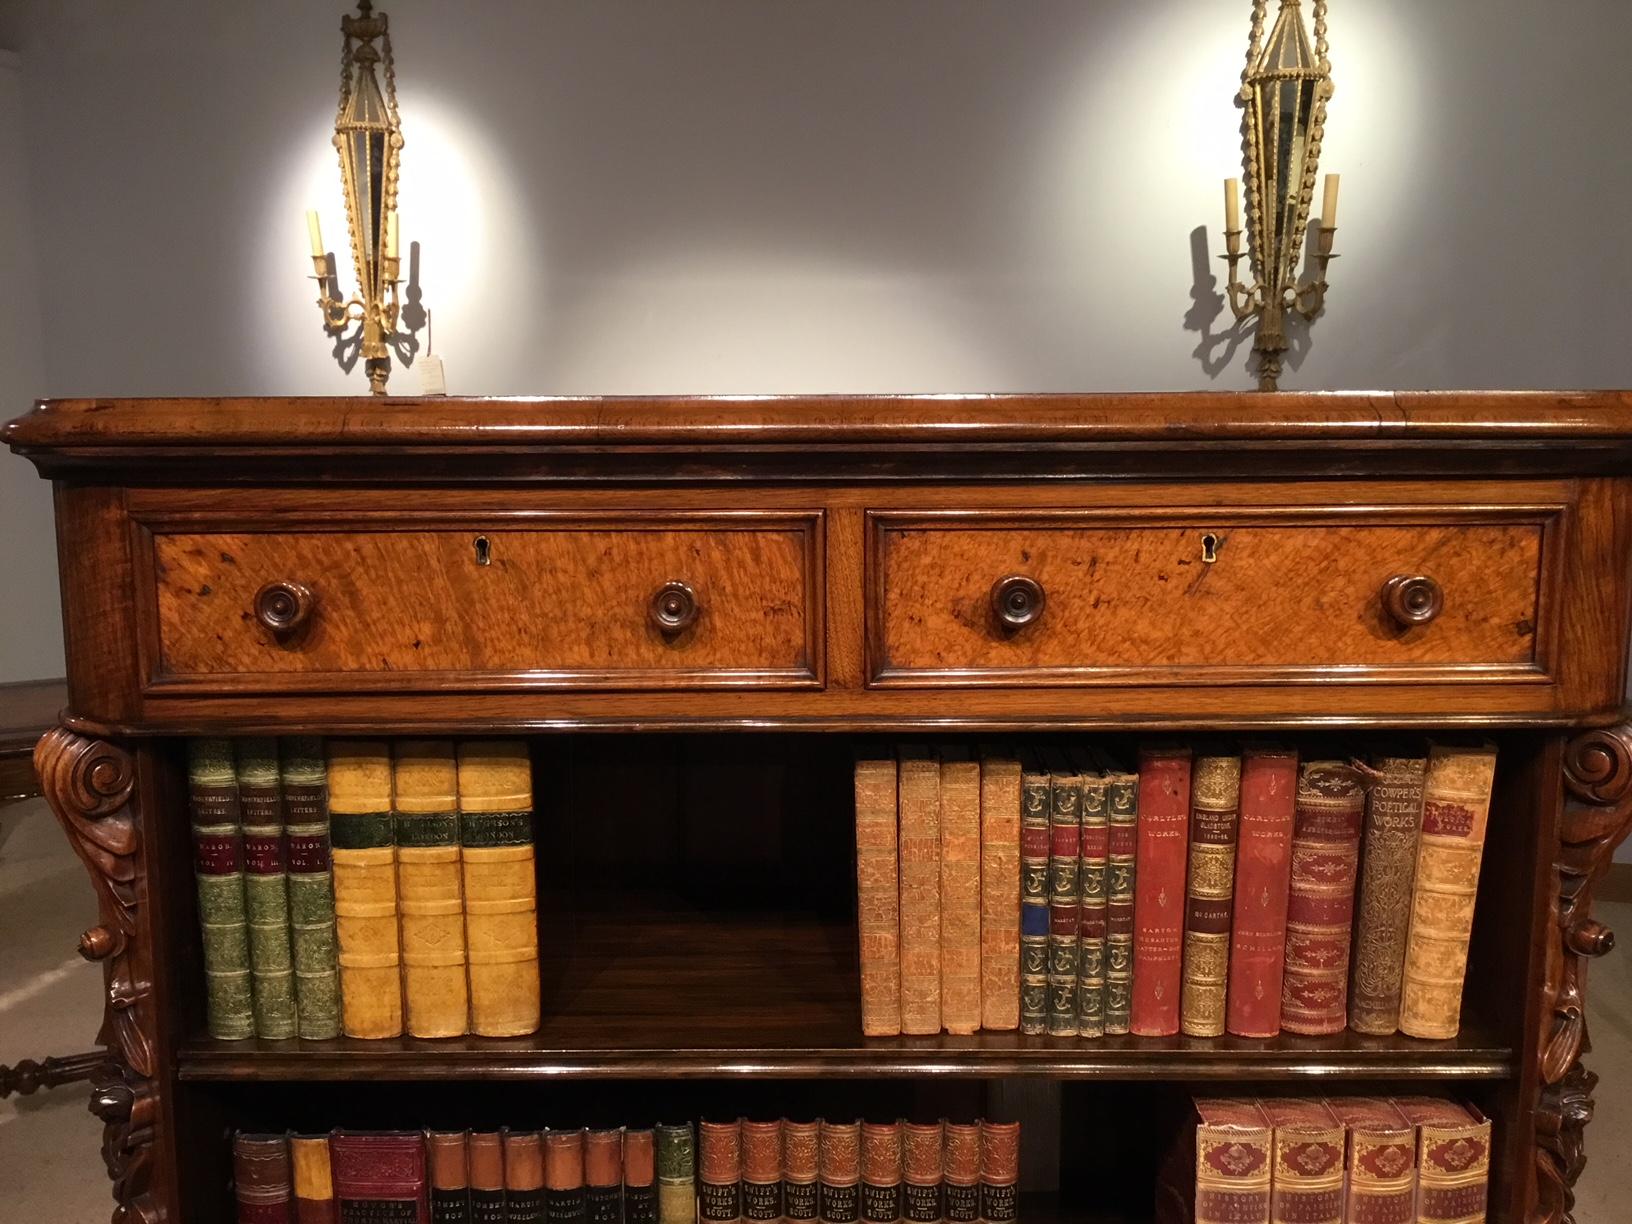 A fine quality Victorian period burr walnut open bookcase. The top is veneered in the finest well figured burr walnut with rounded corners and an ogee moulded edge. With two rectangular cedar lined frieze drawers veneered in burr walnut and having